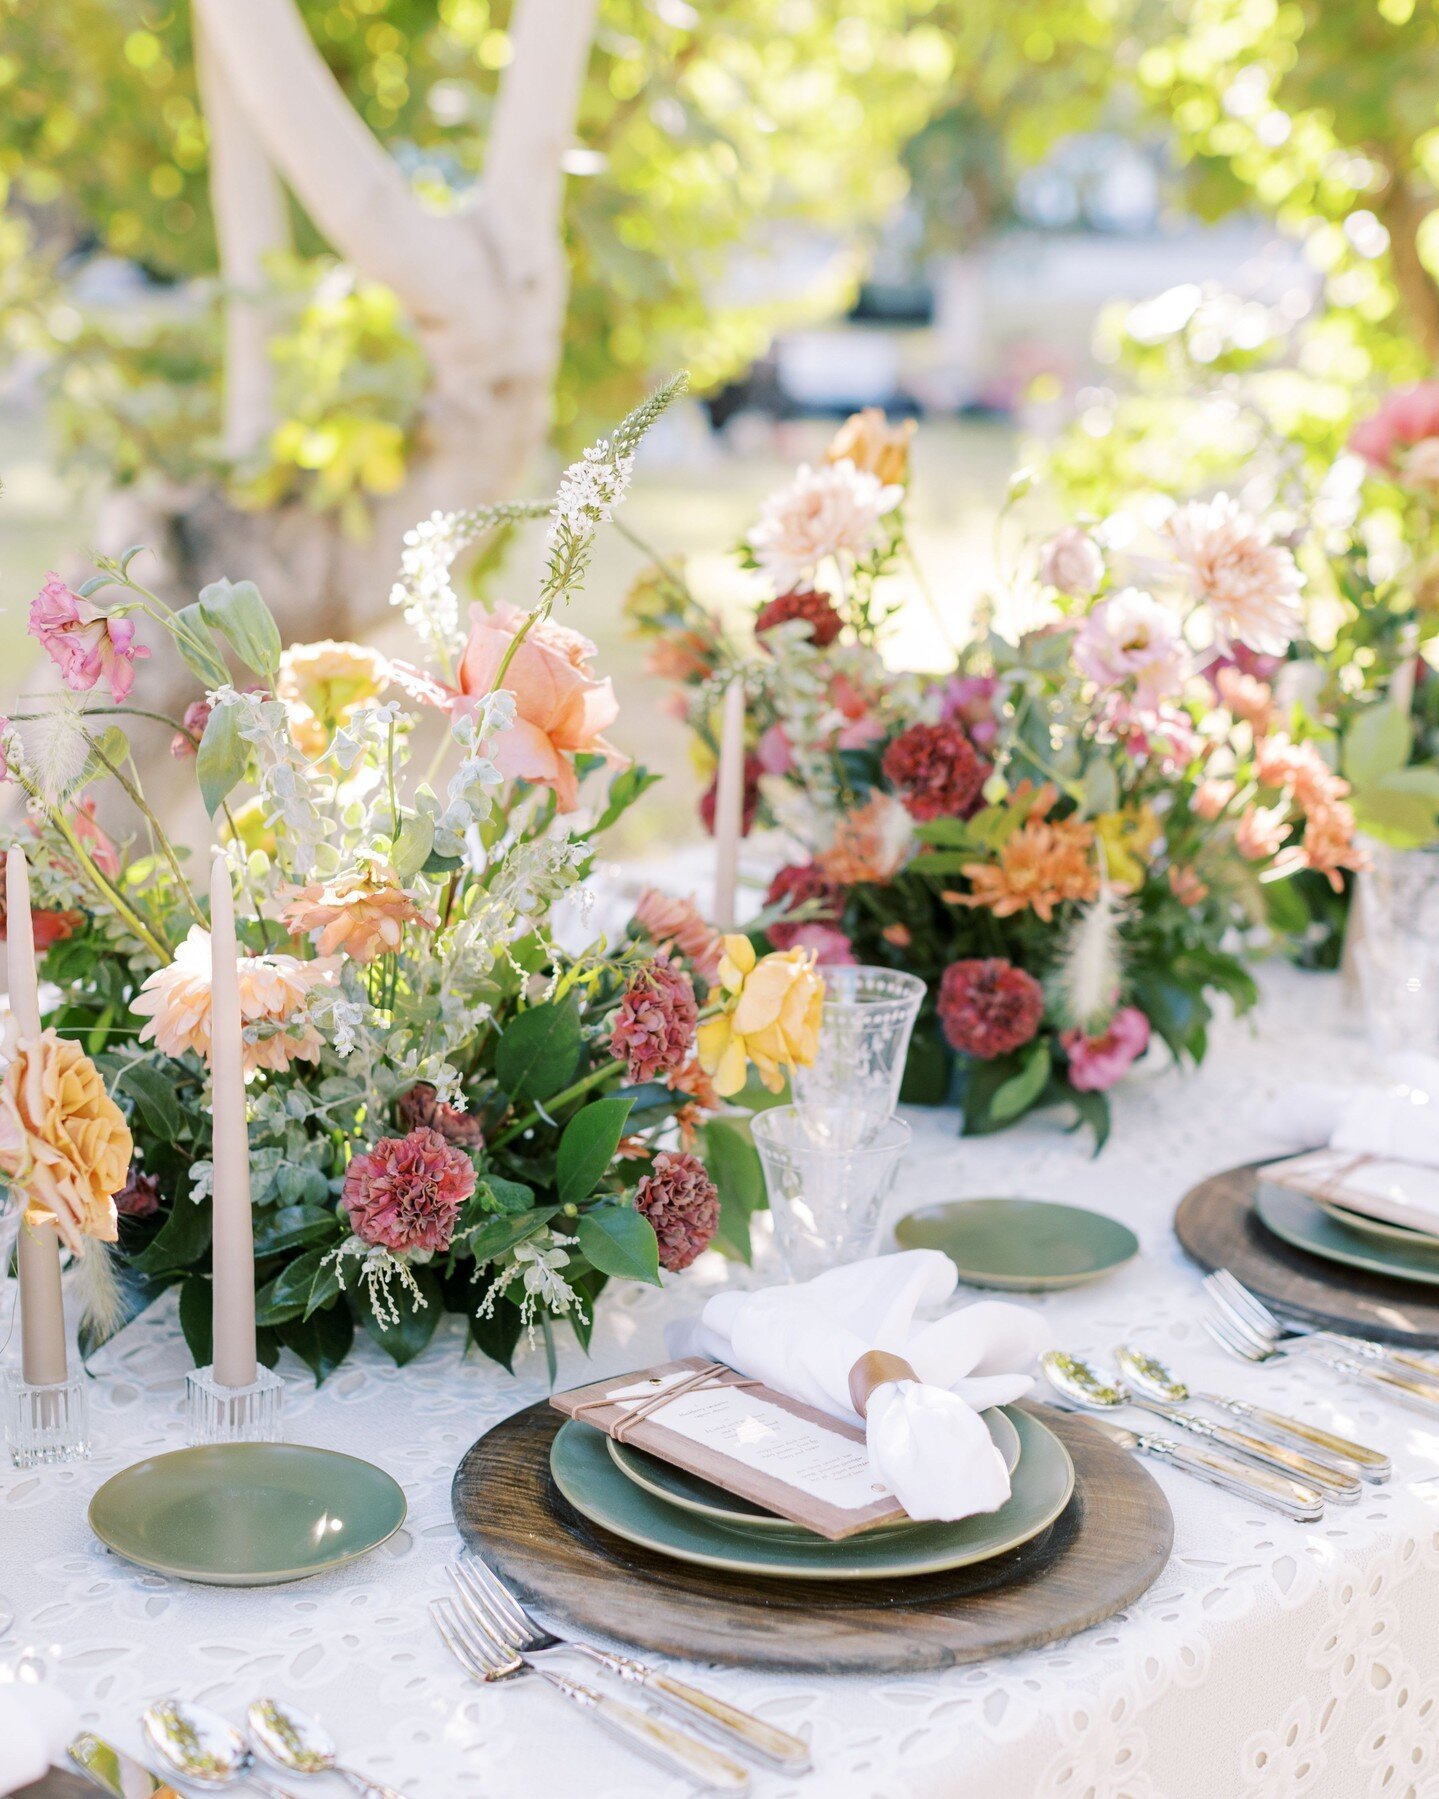 A magical dinner al fresco in the grove of trees at Greengale Farms with all the best details! Add this spot to your list of venue tours for your Las Vegas Wedding!

Planner &amp; Designer: @ashleycreative 
Photographer: @shaunaandjordon 
Venue: @gre